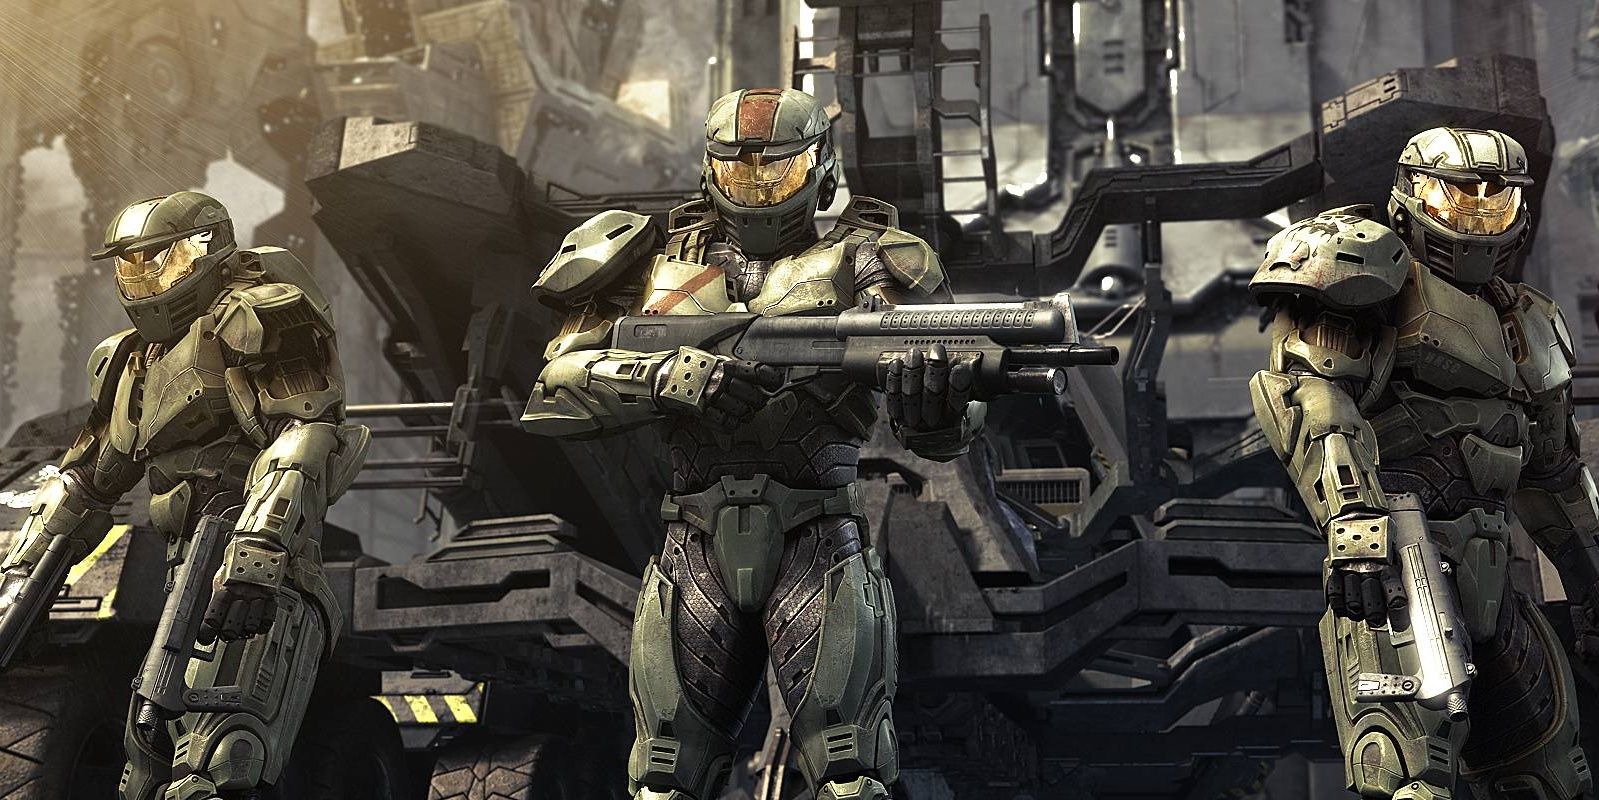 Halo: The 10 Biggest Plot Holes In The Series (So Far)